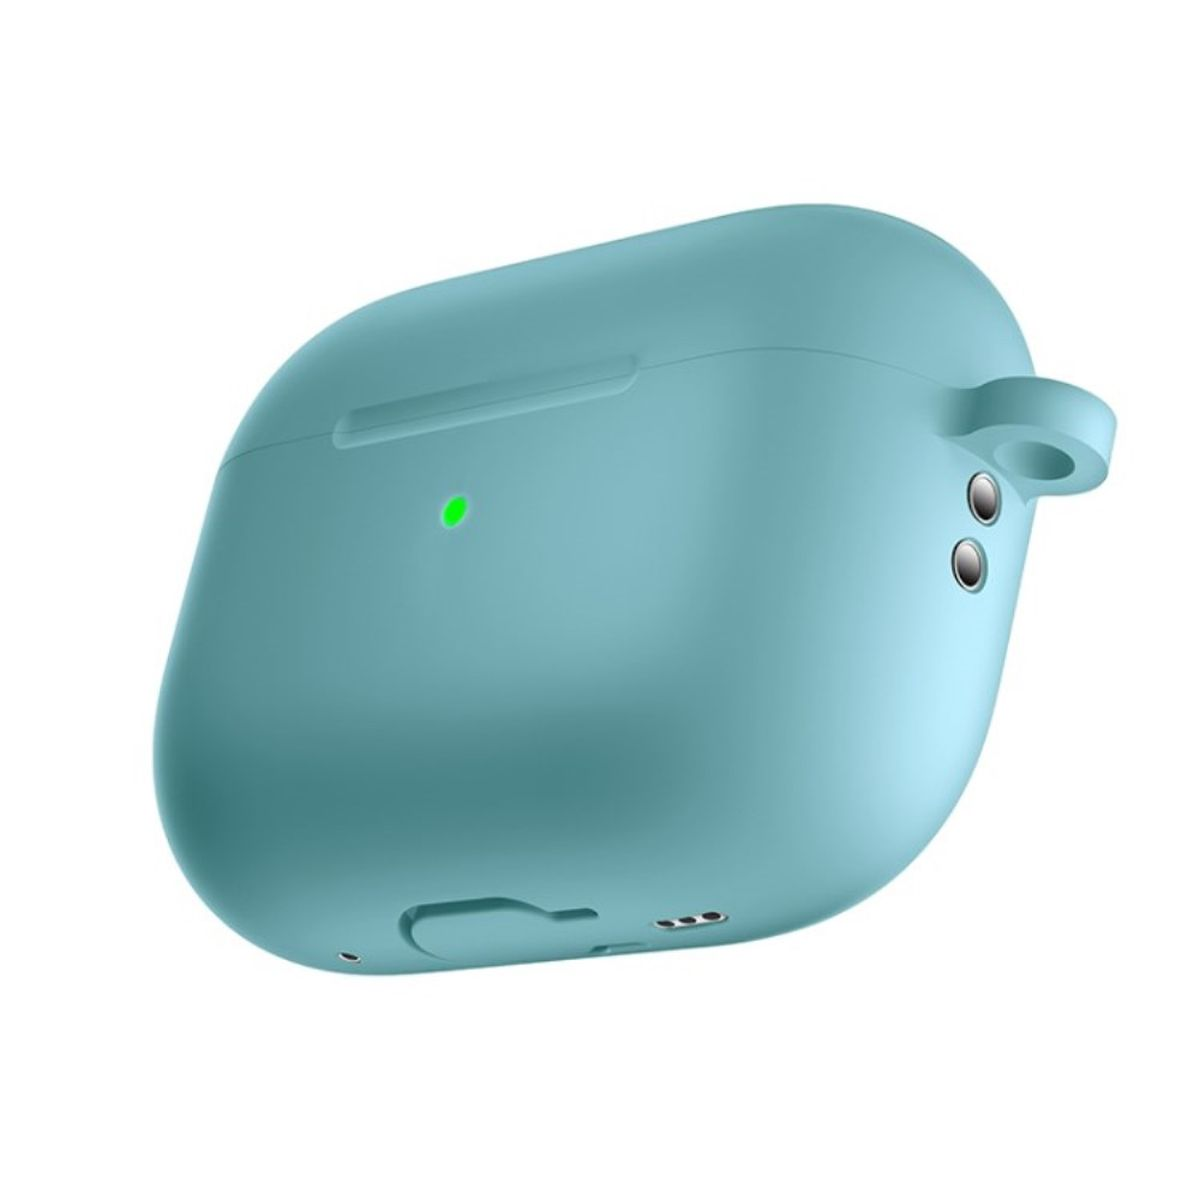 Pro Airpods mint, Unisex, 2 Apple für COVERKINGZ 77380 Silikoncover Ladecase